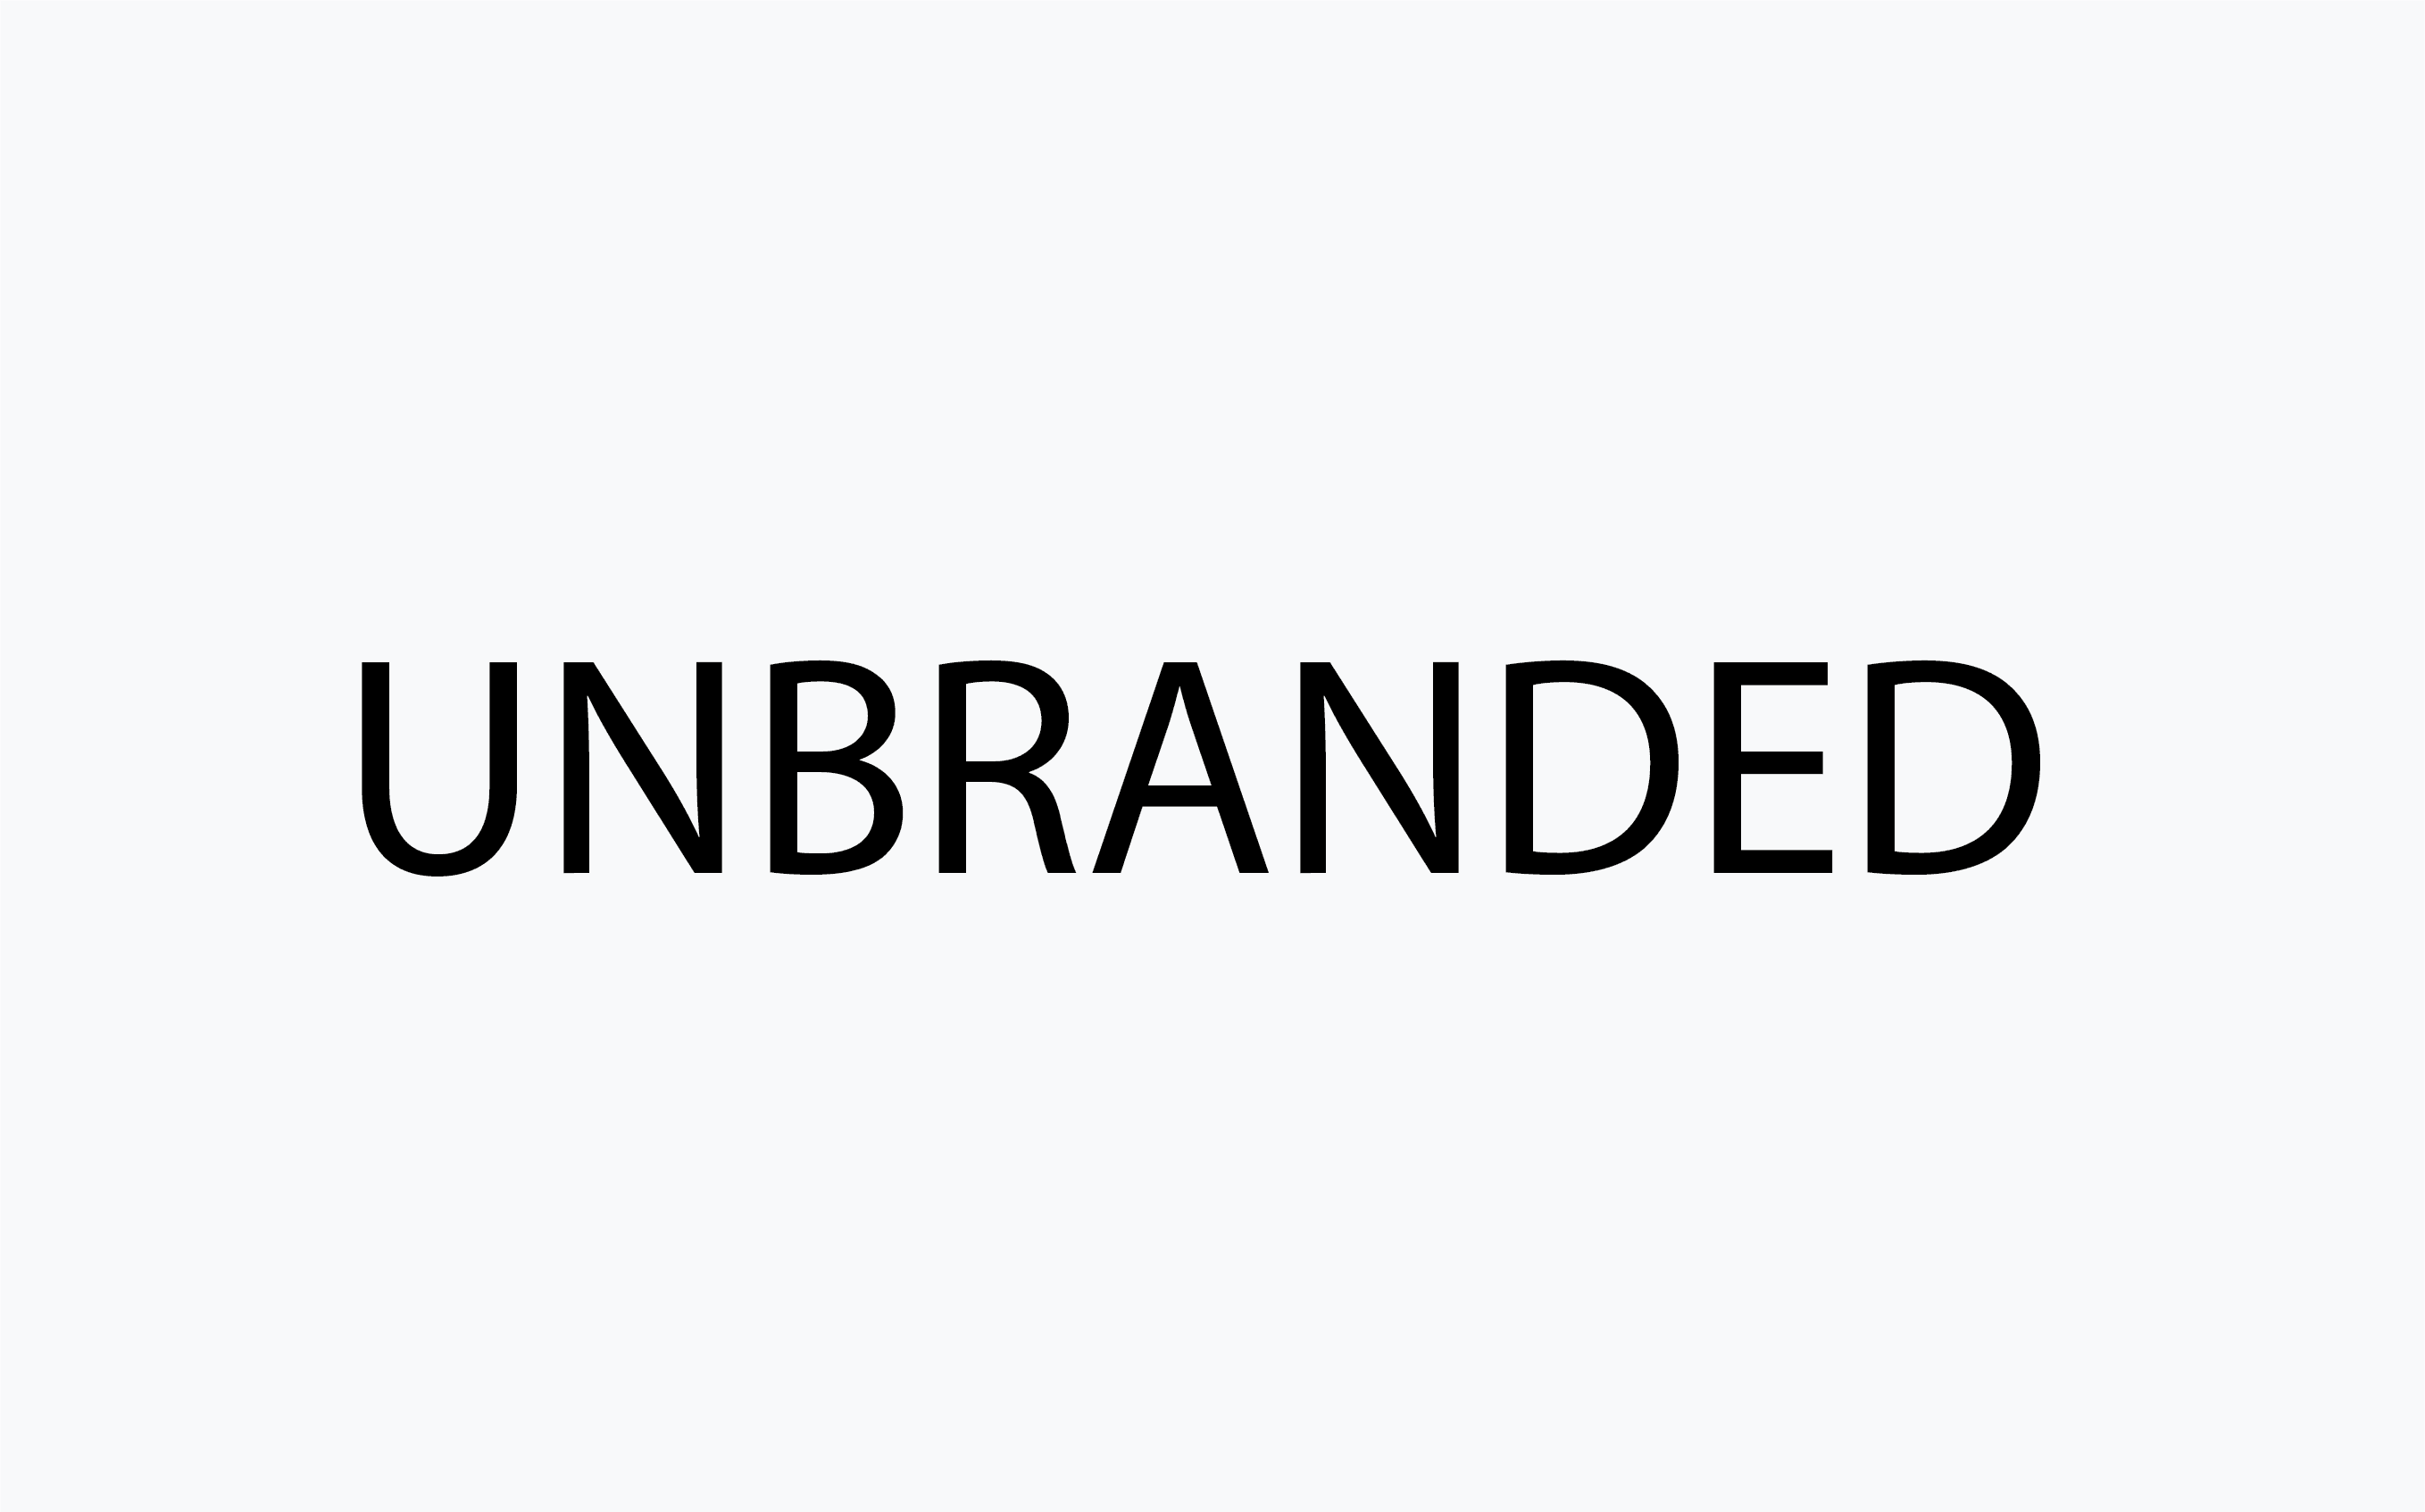 Unbranded/Unknown category